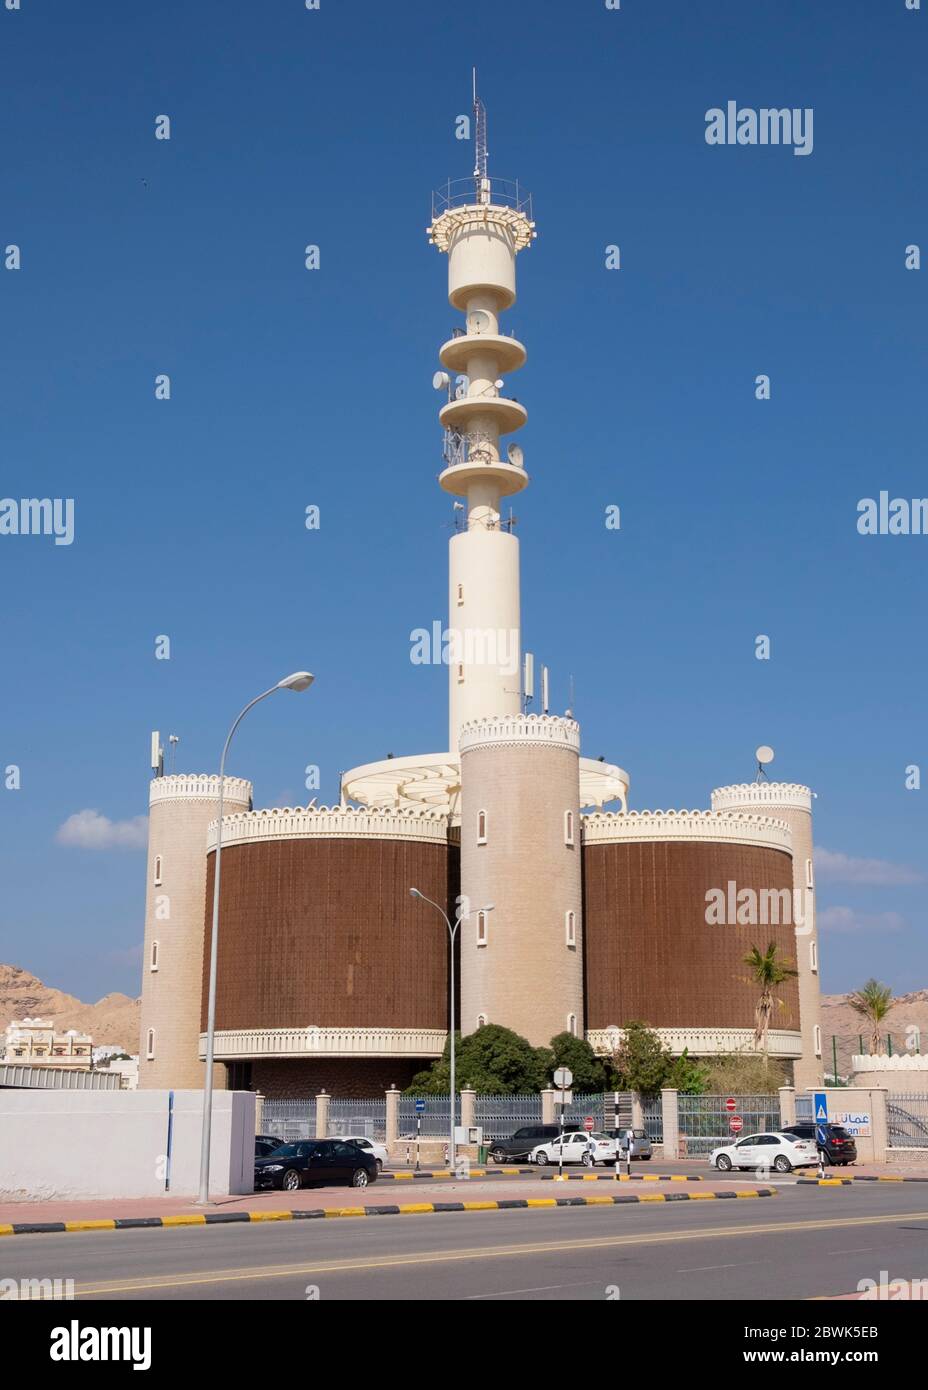 The Oman Telecommunications Company building and Transmission Tower on  Markzi Mutrah Al Tijari street in the Ruwi district of Muscat, Oman,  Sultanate Stock Photo - Alamy